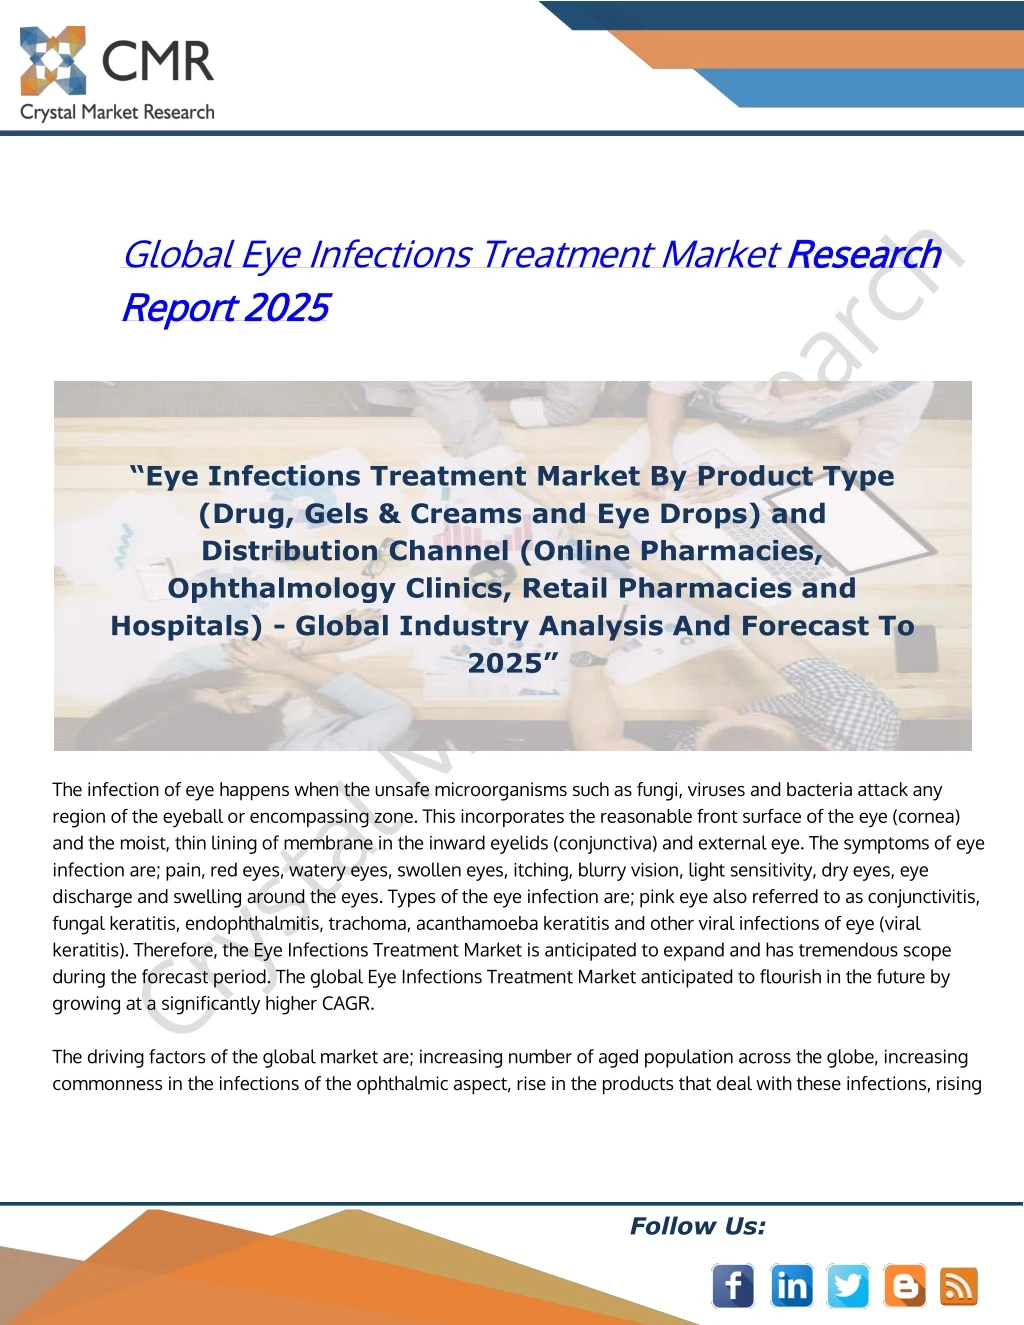 global eye infections treatment market research